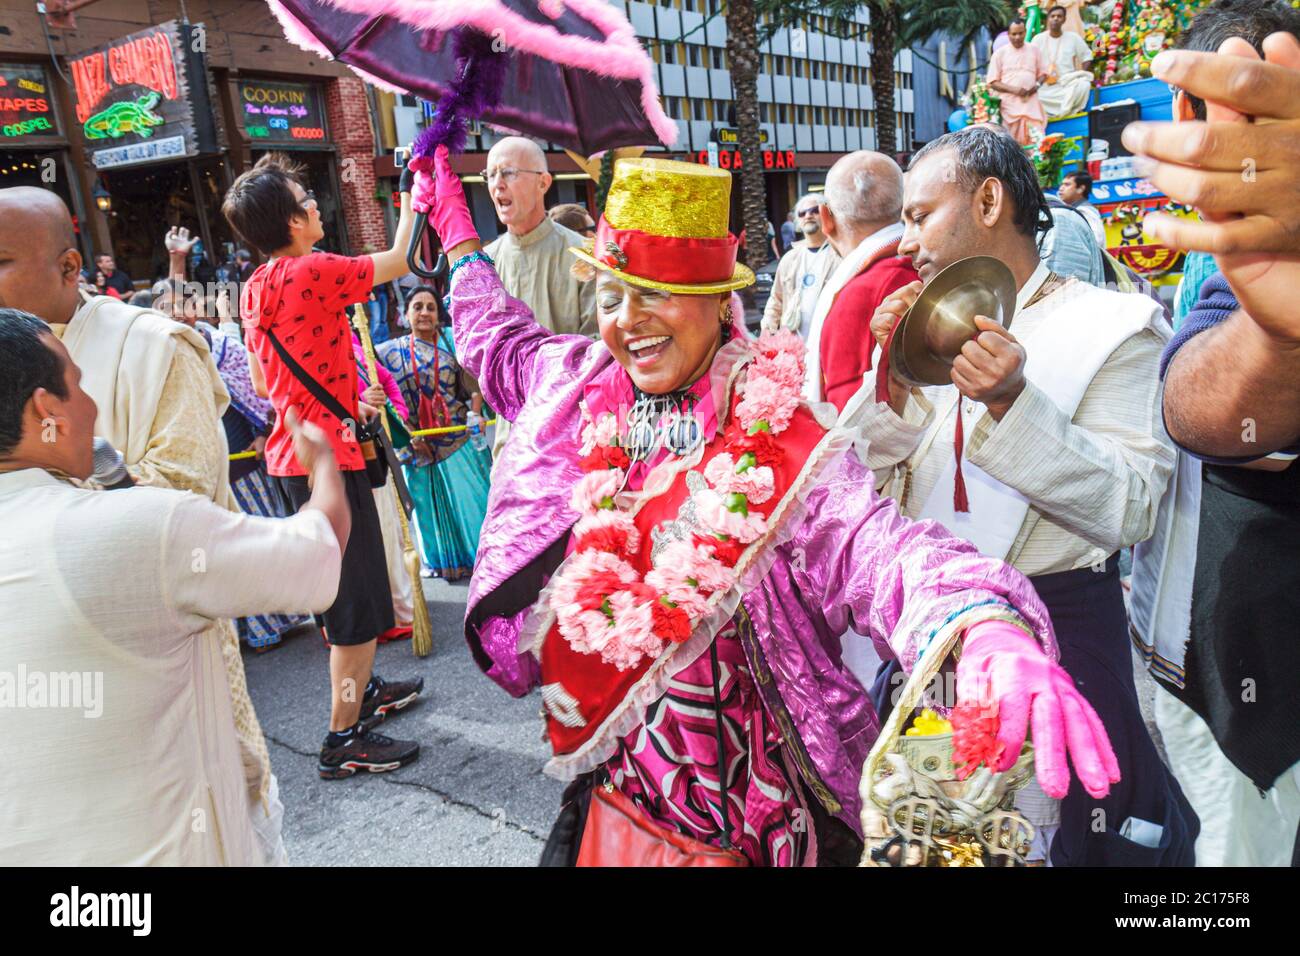 New Orleans Louisiana,downtown,Canal Street,Festival of India,Rath Yatra,Hare Krishna,Eastern religion,festival,parade,procession,Asian man men male,w Stock Photo